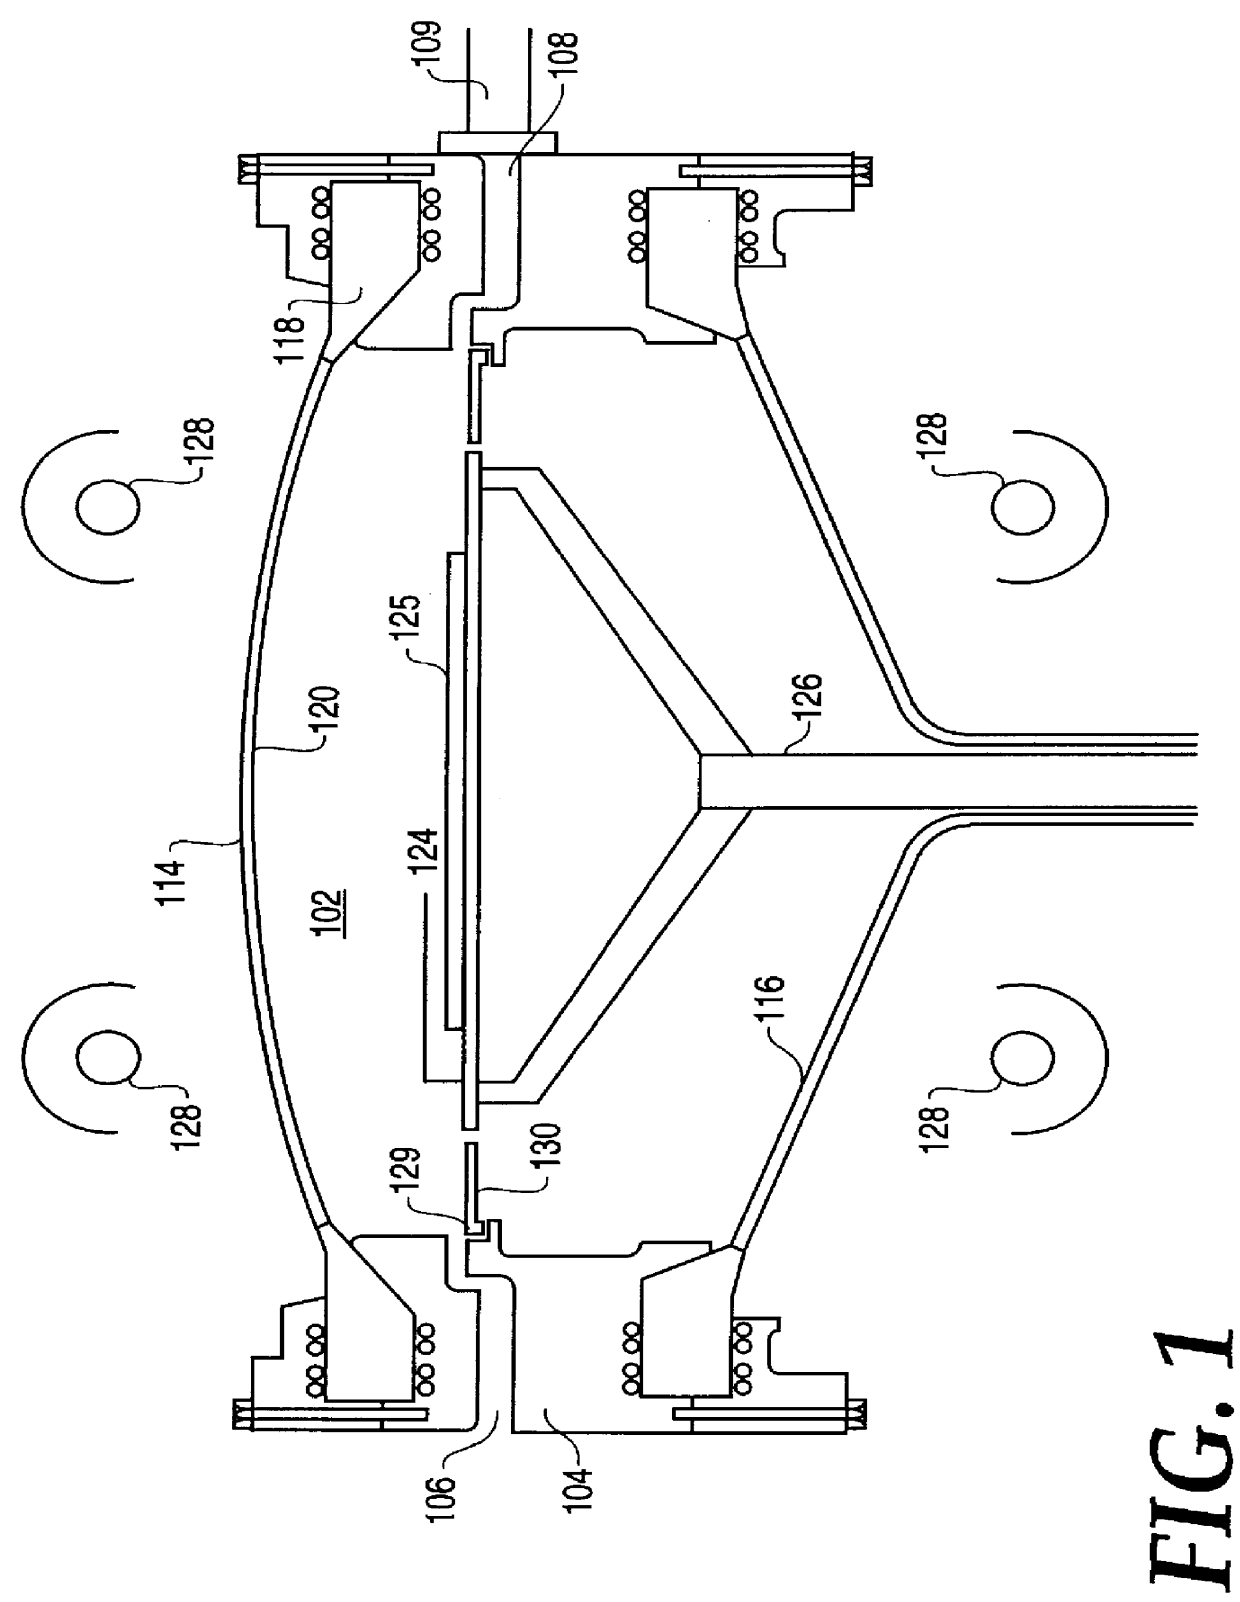 Method of cleaning CVD cold-wall chamber and exhaust lines